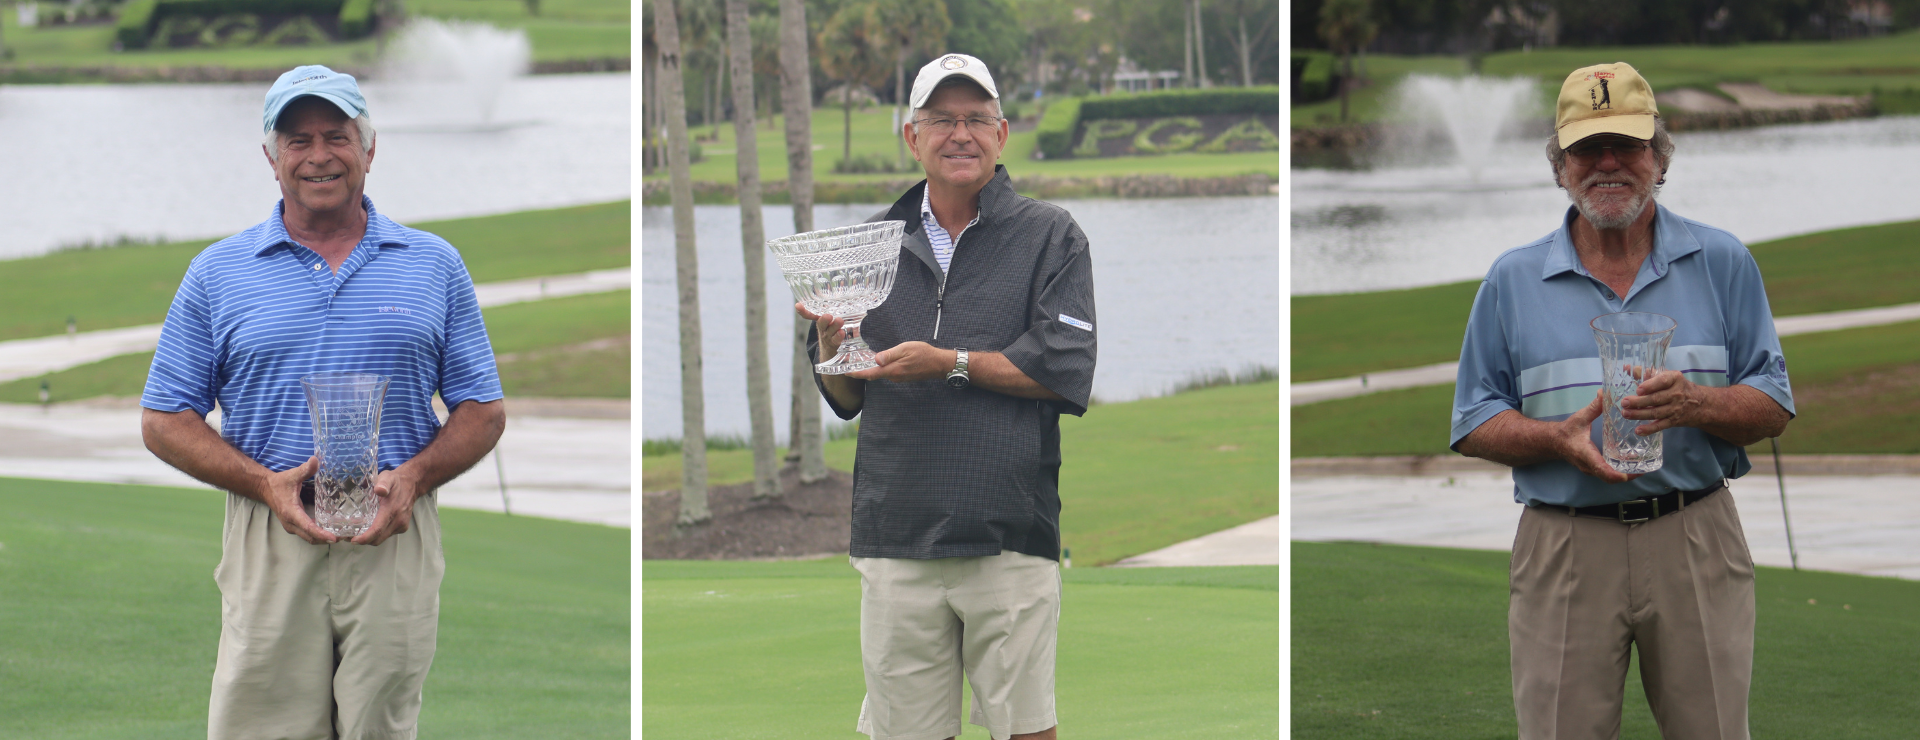 Champions Crowned at Super Sr. Match Play